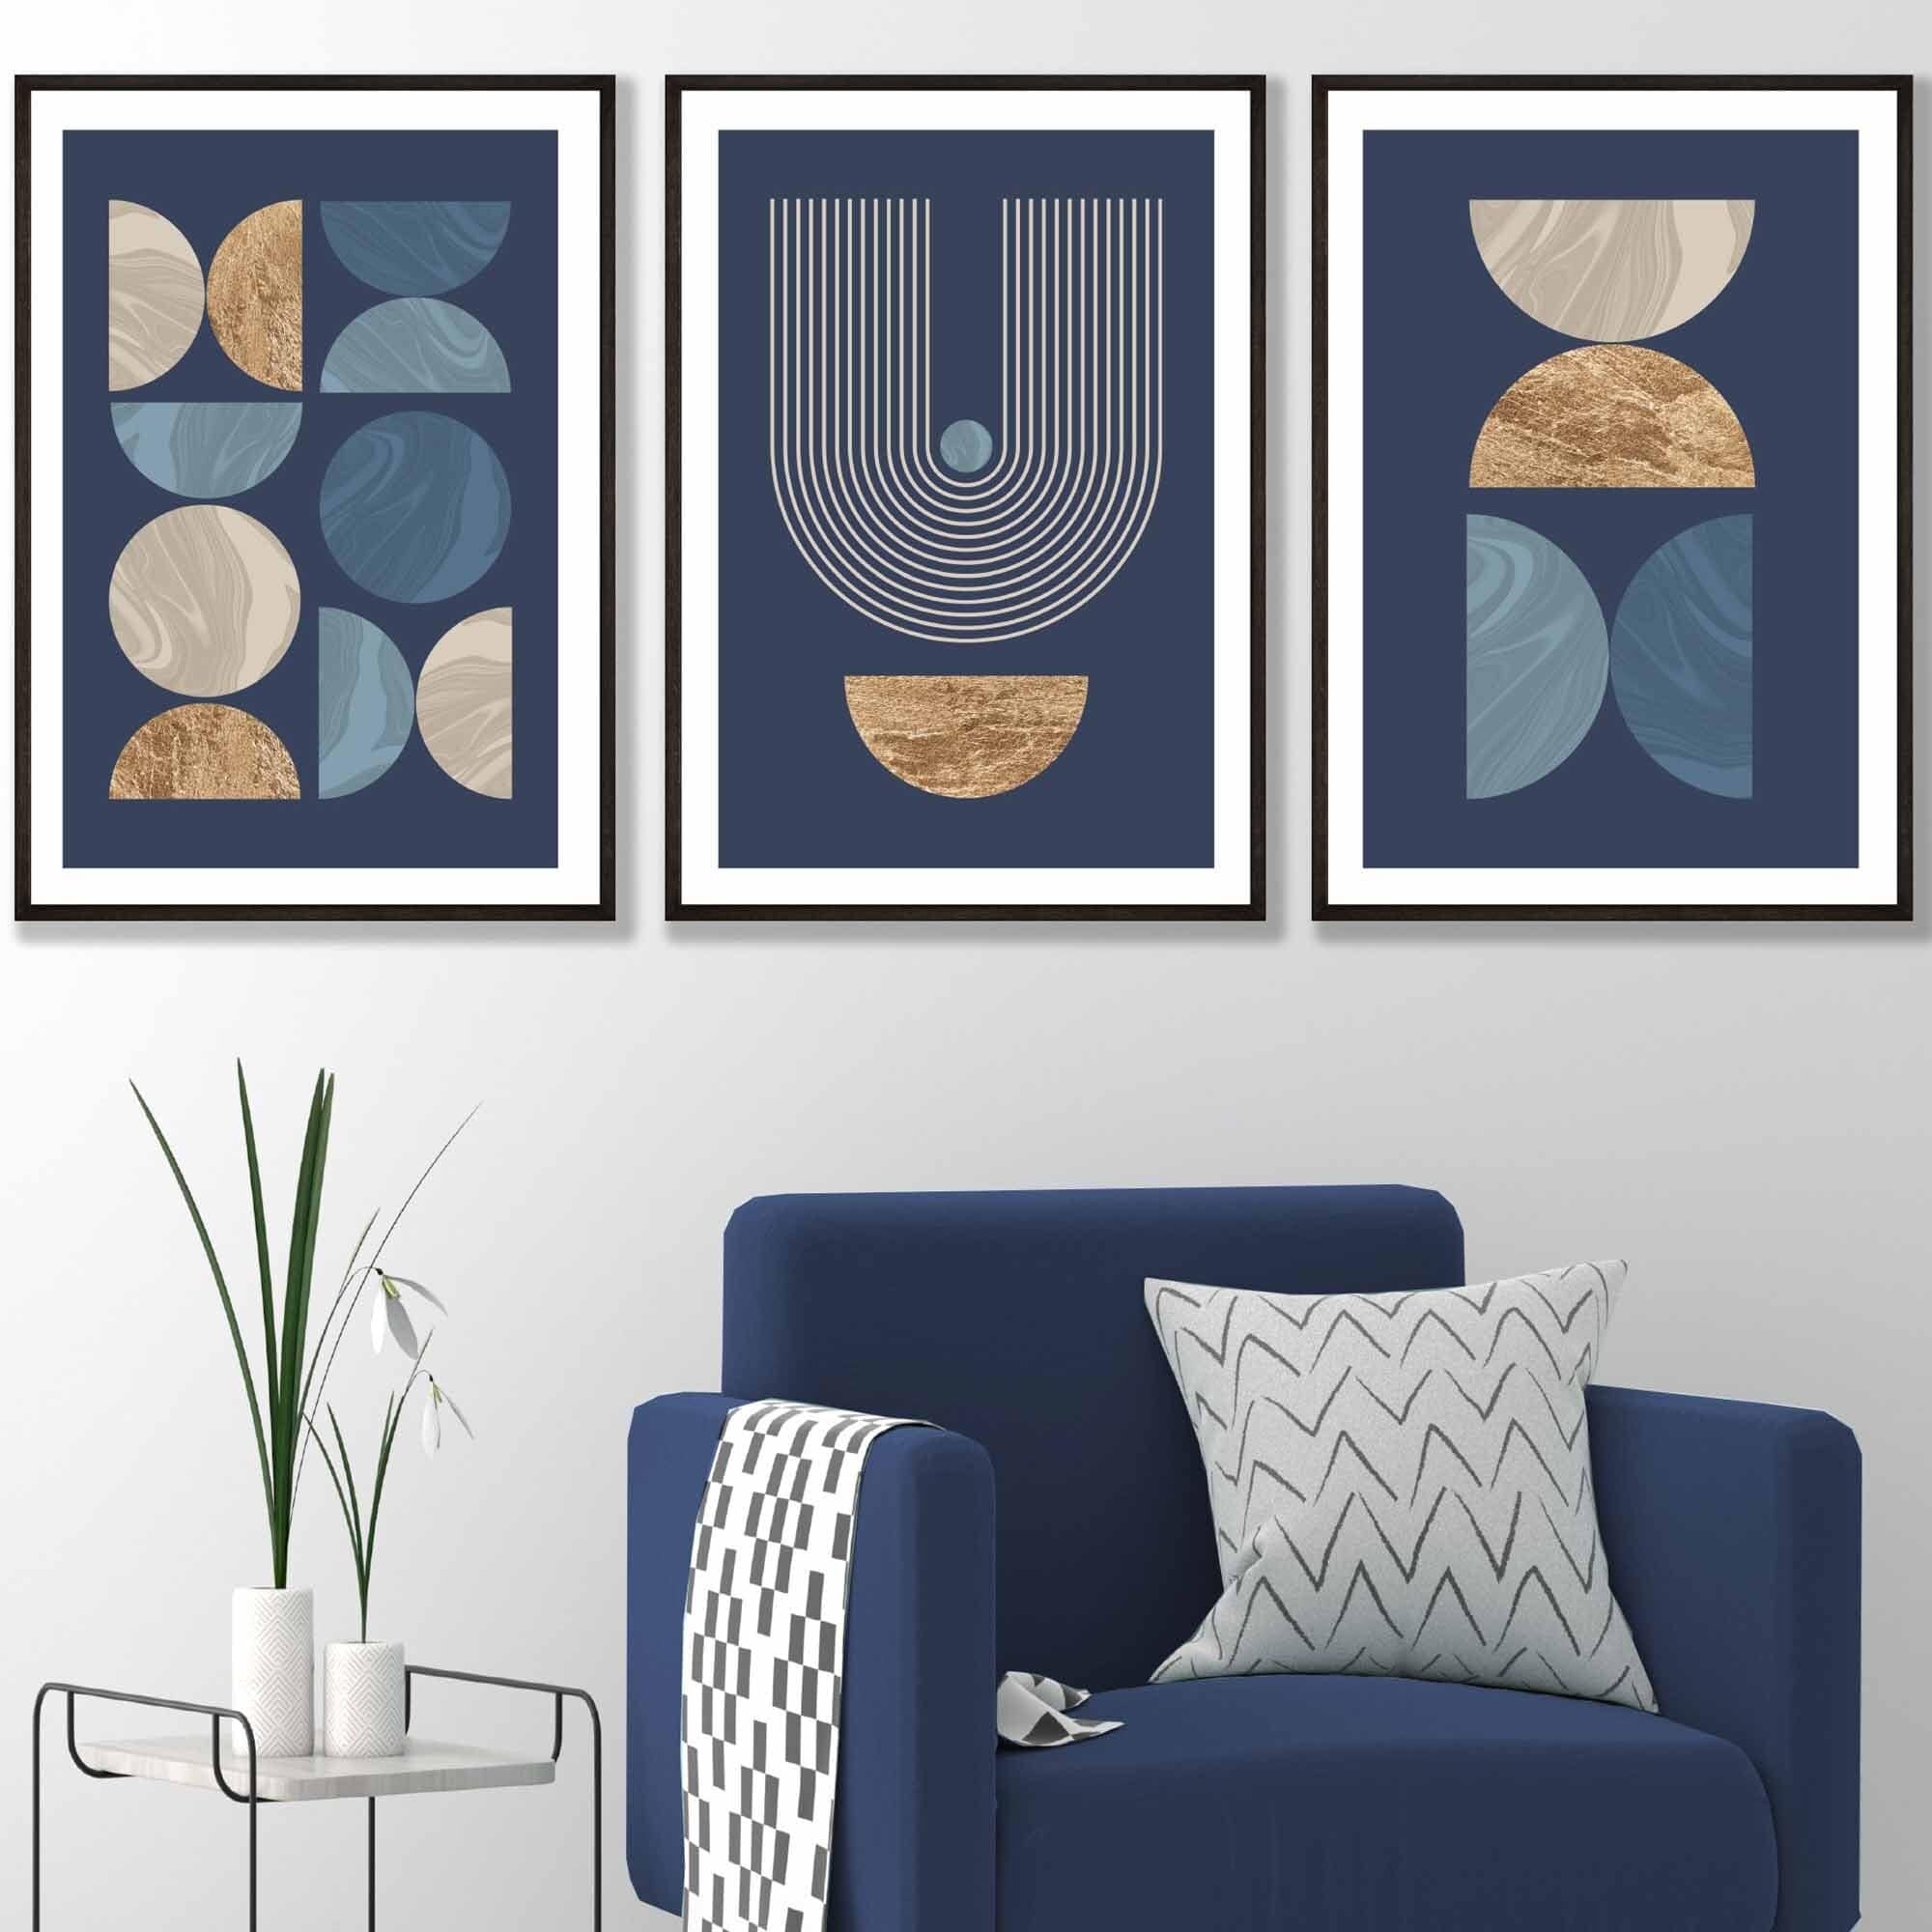 Set of 3 FRAMED Mid Century Modern Geometric Navy Blue with Beige and Gold Wall Art Prints | Artze Wall Art UK